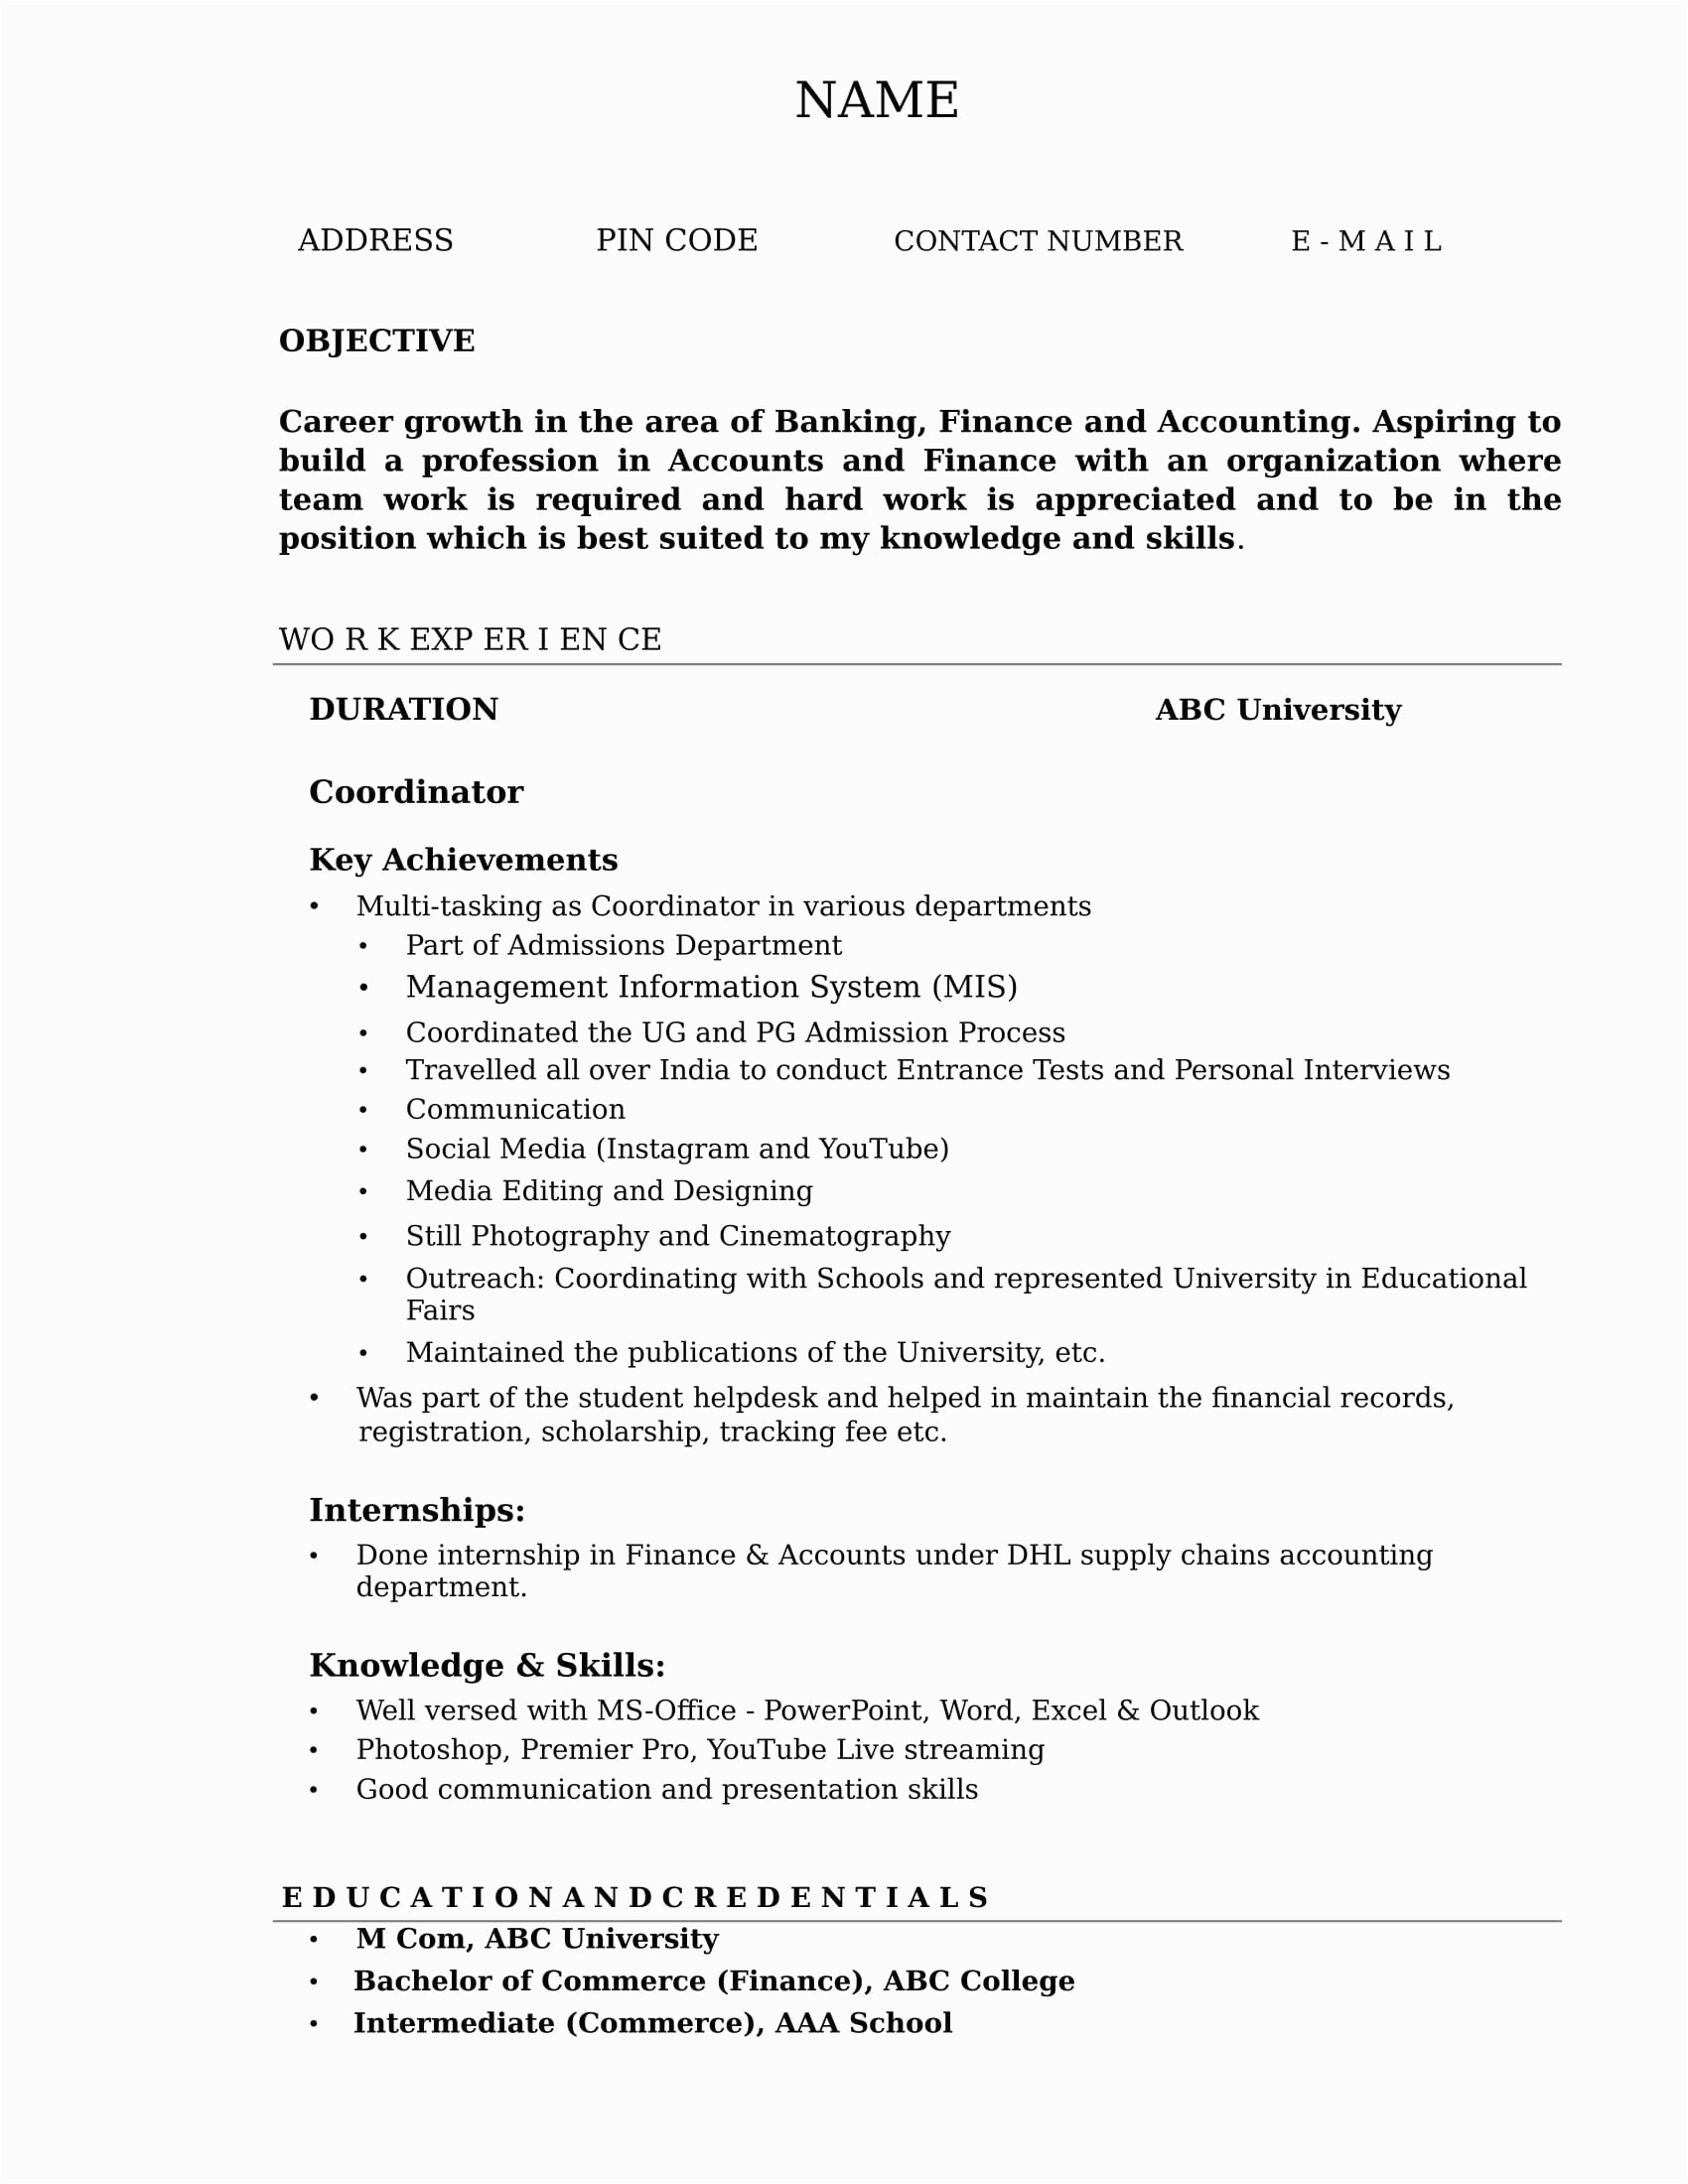 Resume Templates for Accounting and Finance Resume Templates for Accounting & Finance Freshers